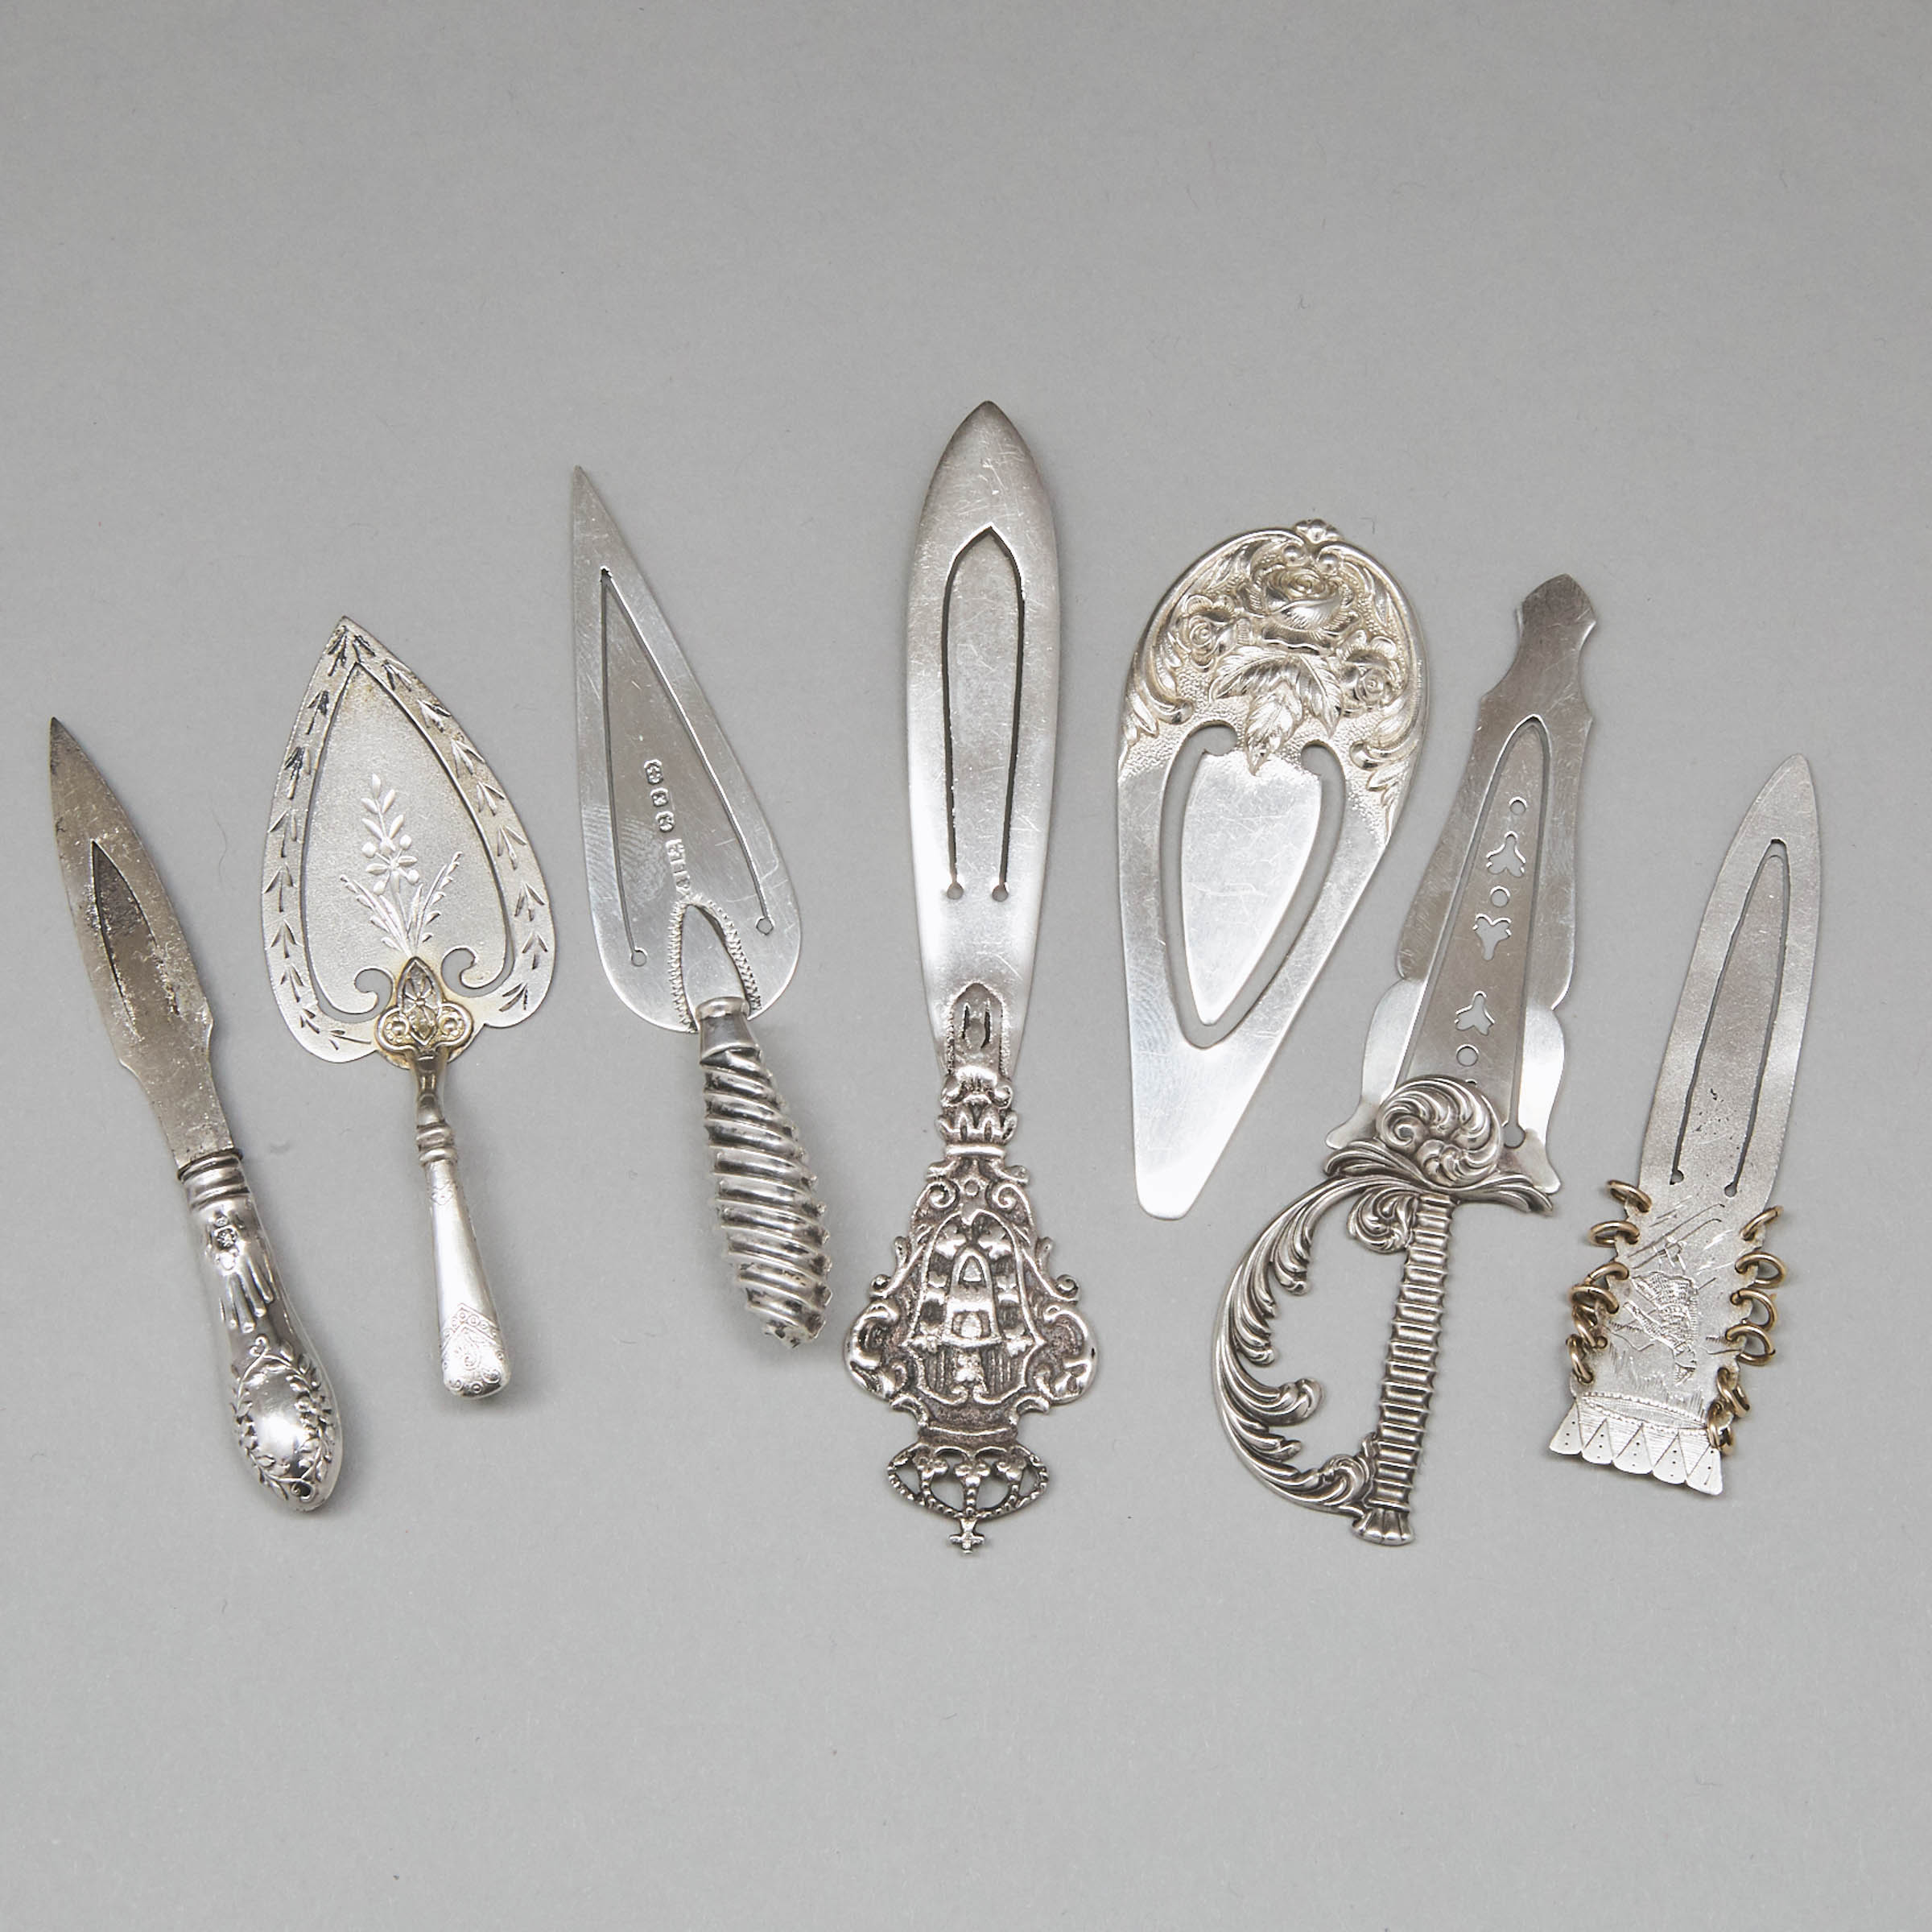 Seven Mainly North American, Scandinavian and Edwardian Silver Bookmarks, late 19th/early 20th century